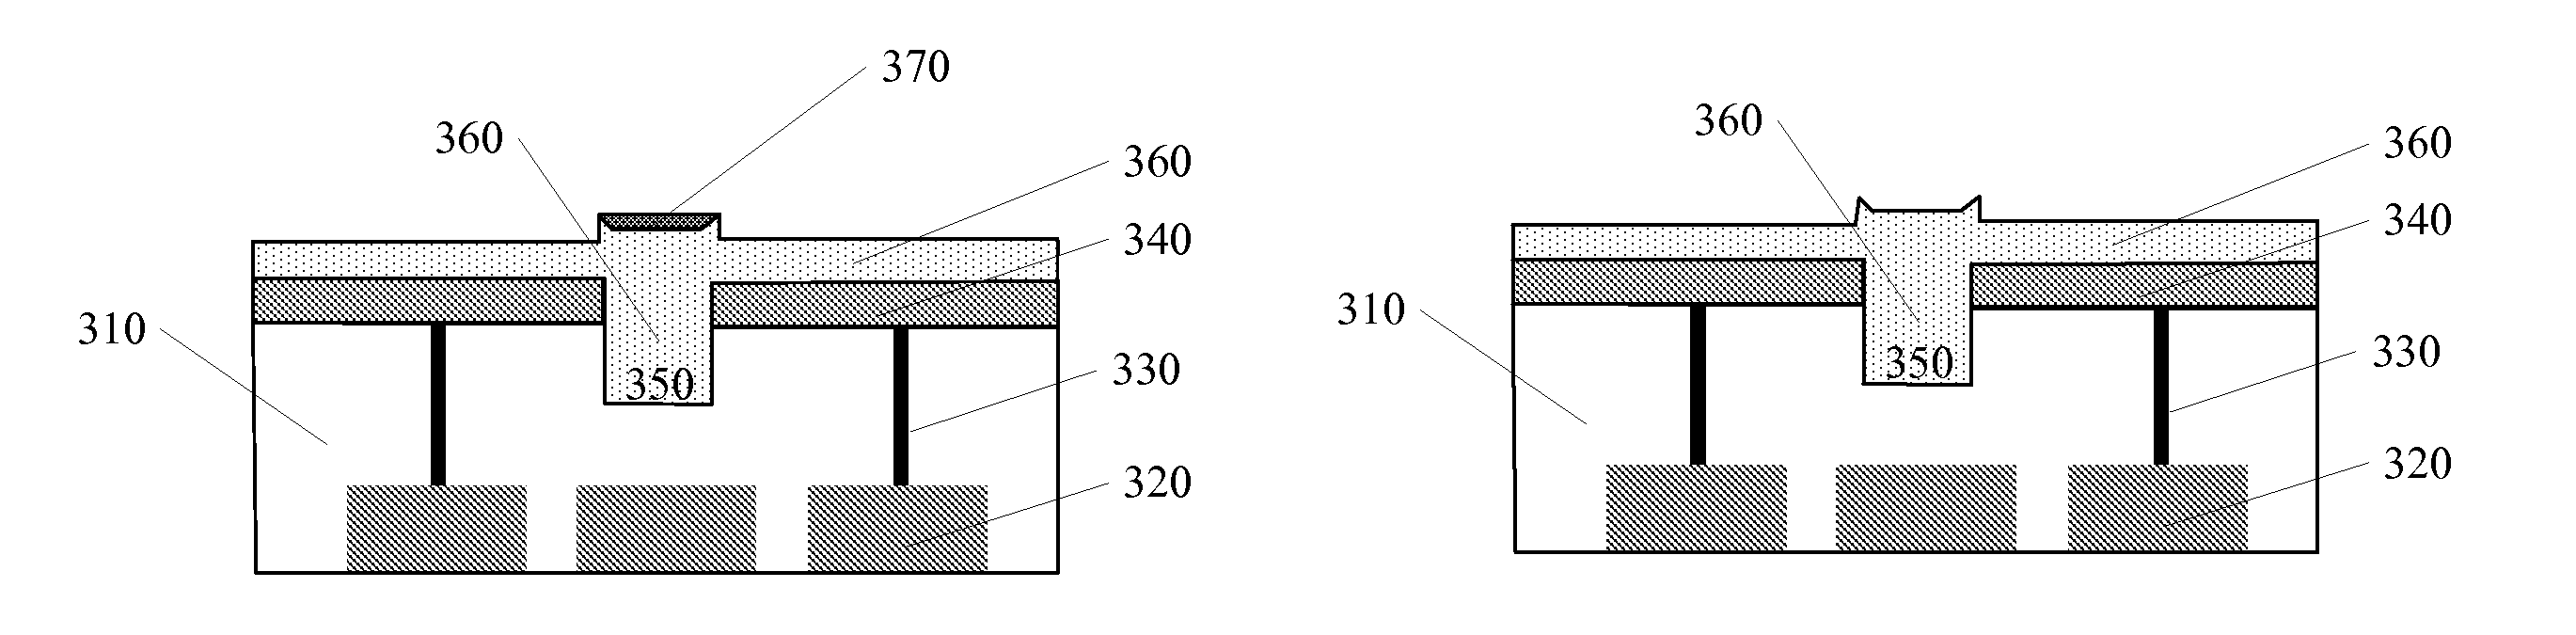 Method for planarization of wafer and method for formation of isolation structure in top metal layer